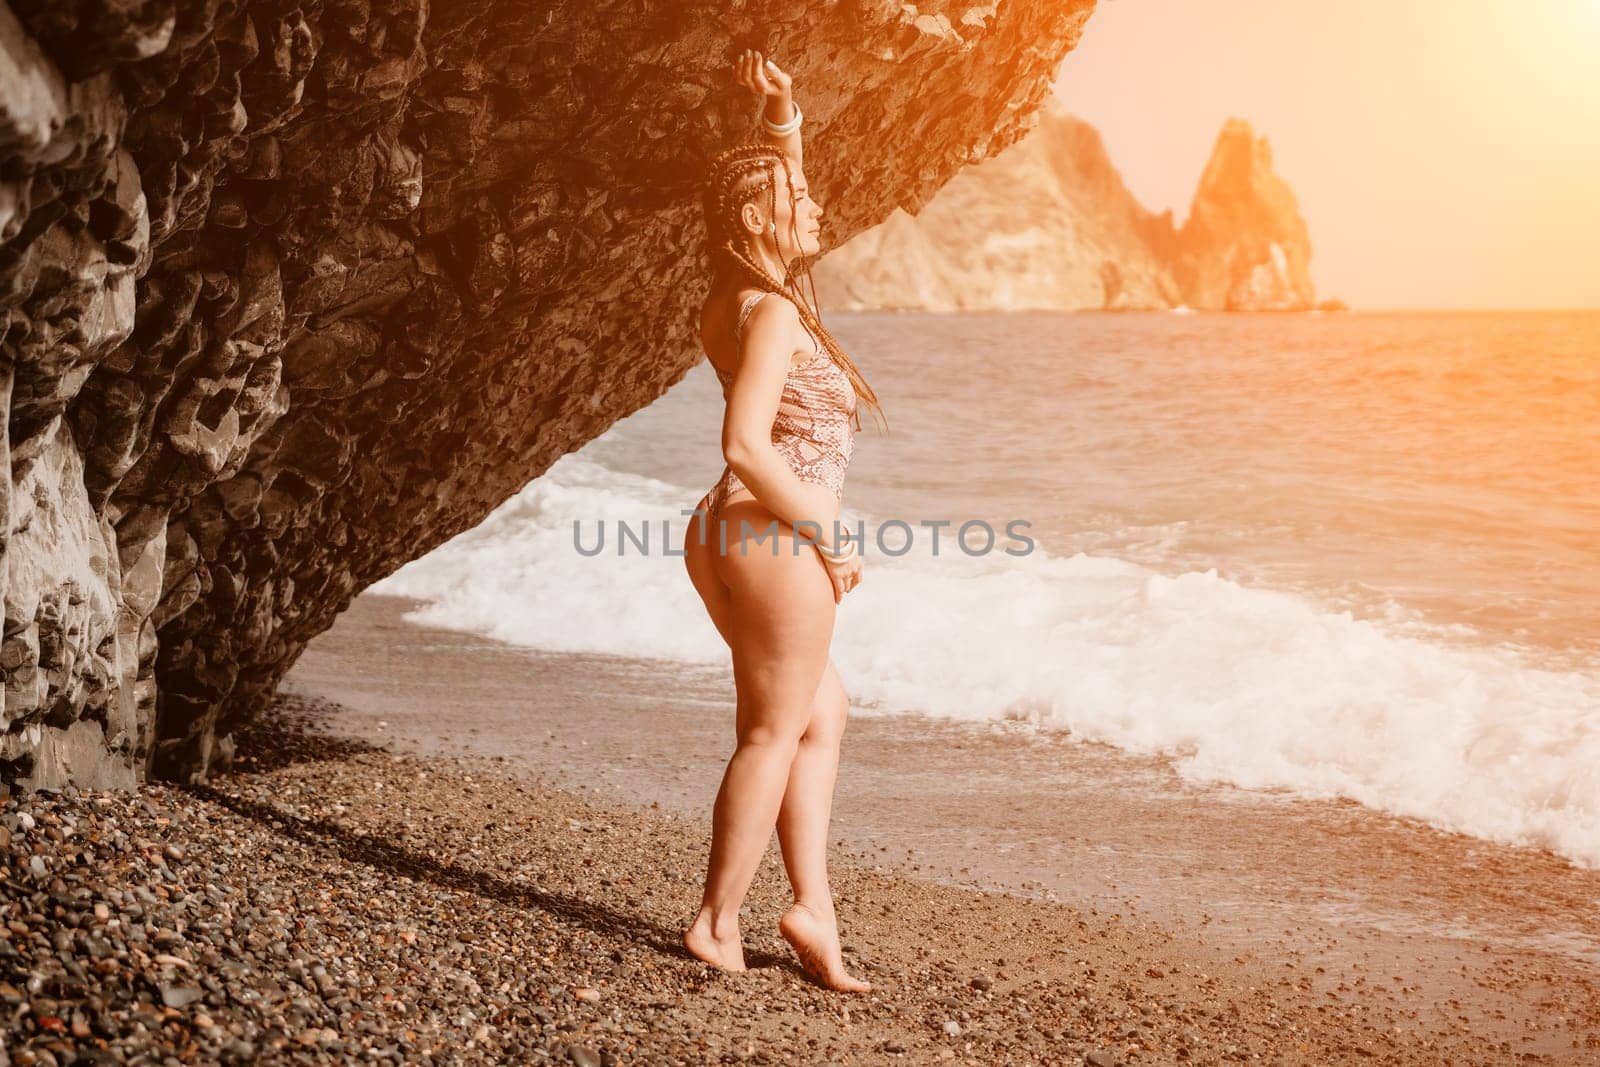 A tourist woman in bikini on beach enjoys the turquoise sea during her summer holiday. Beach vacation. Woman with braids dreadlocks standing with her arms raised near basalt rock enjoying beach ocean by panophotograph